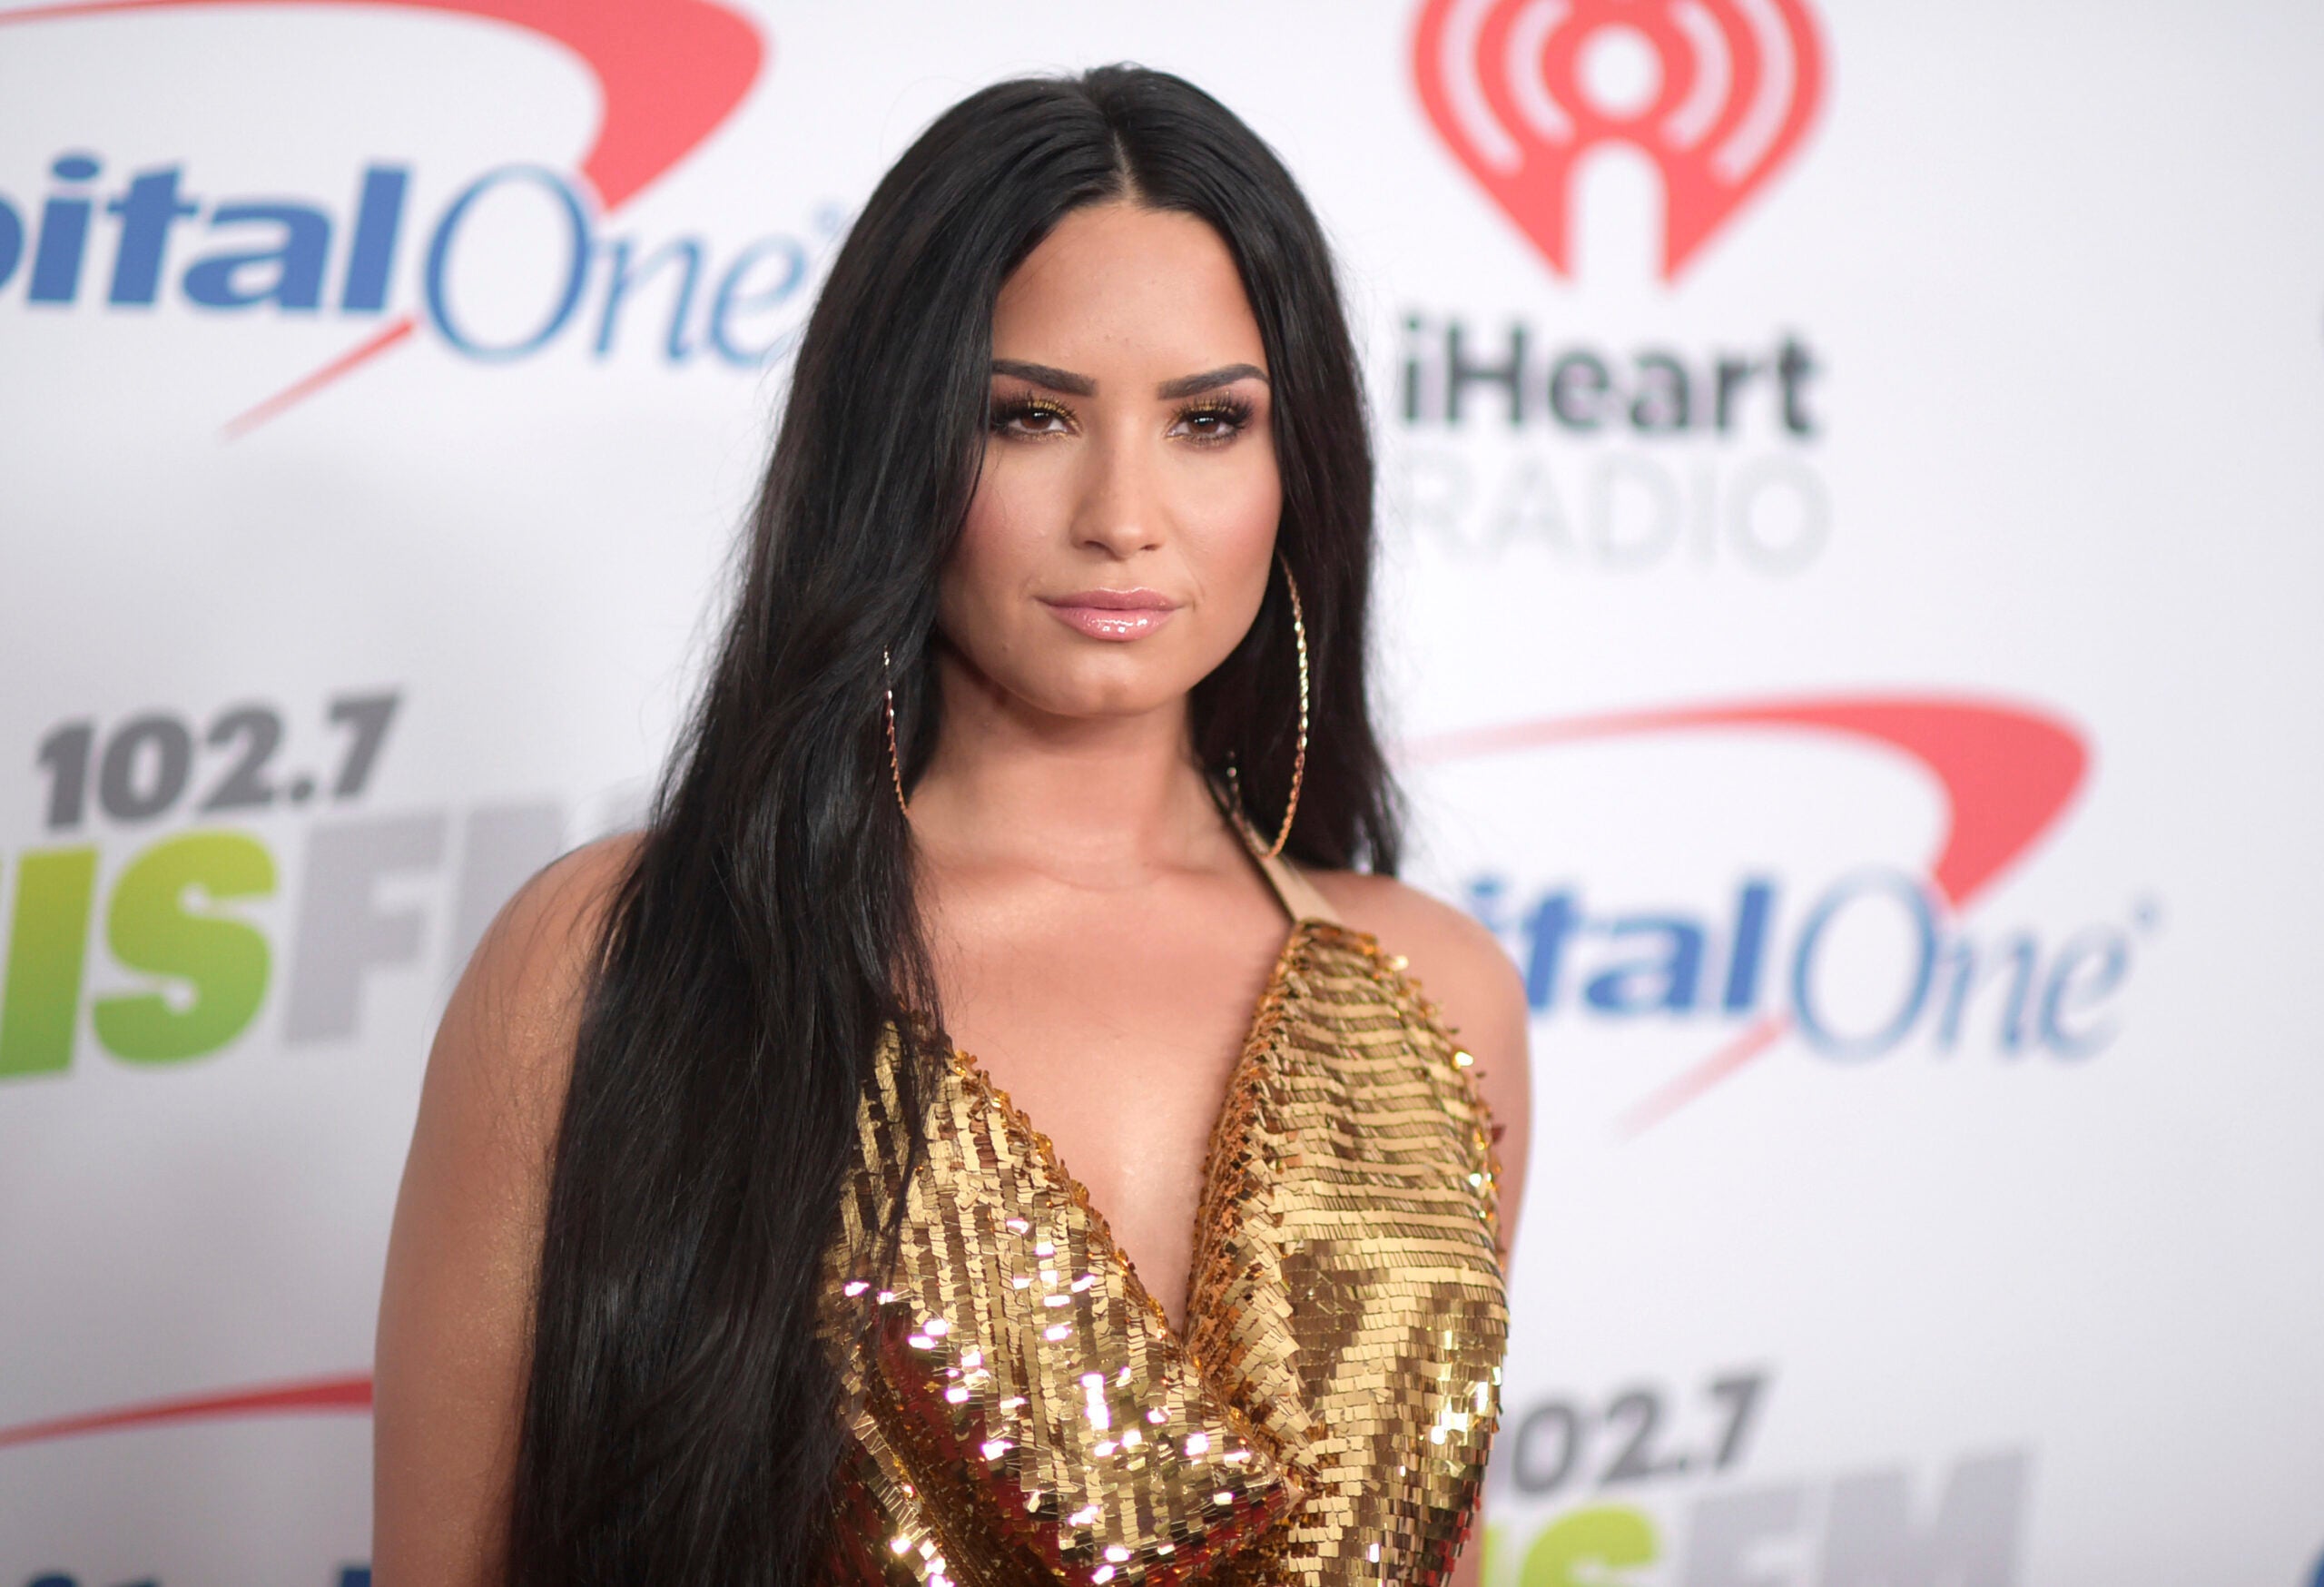 Demi Lovato cancels tour dates to focus on recovery